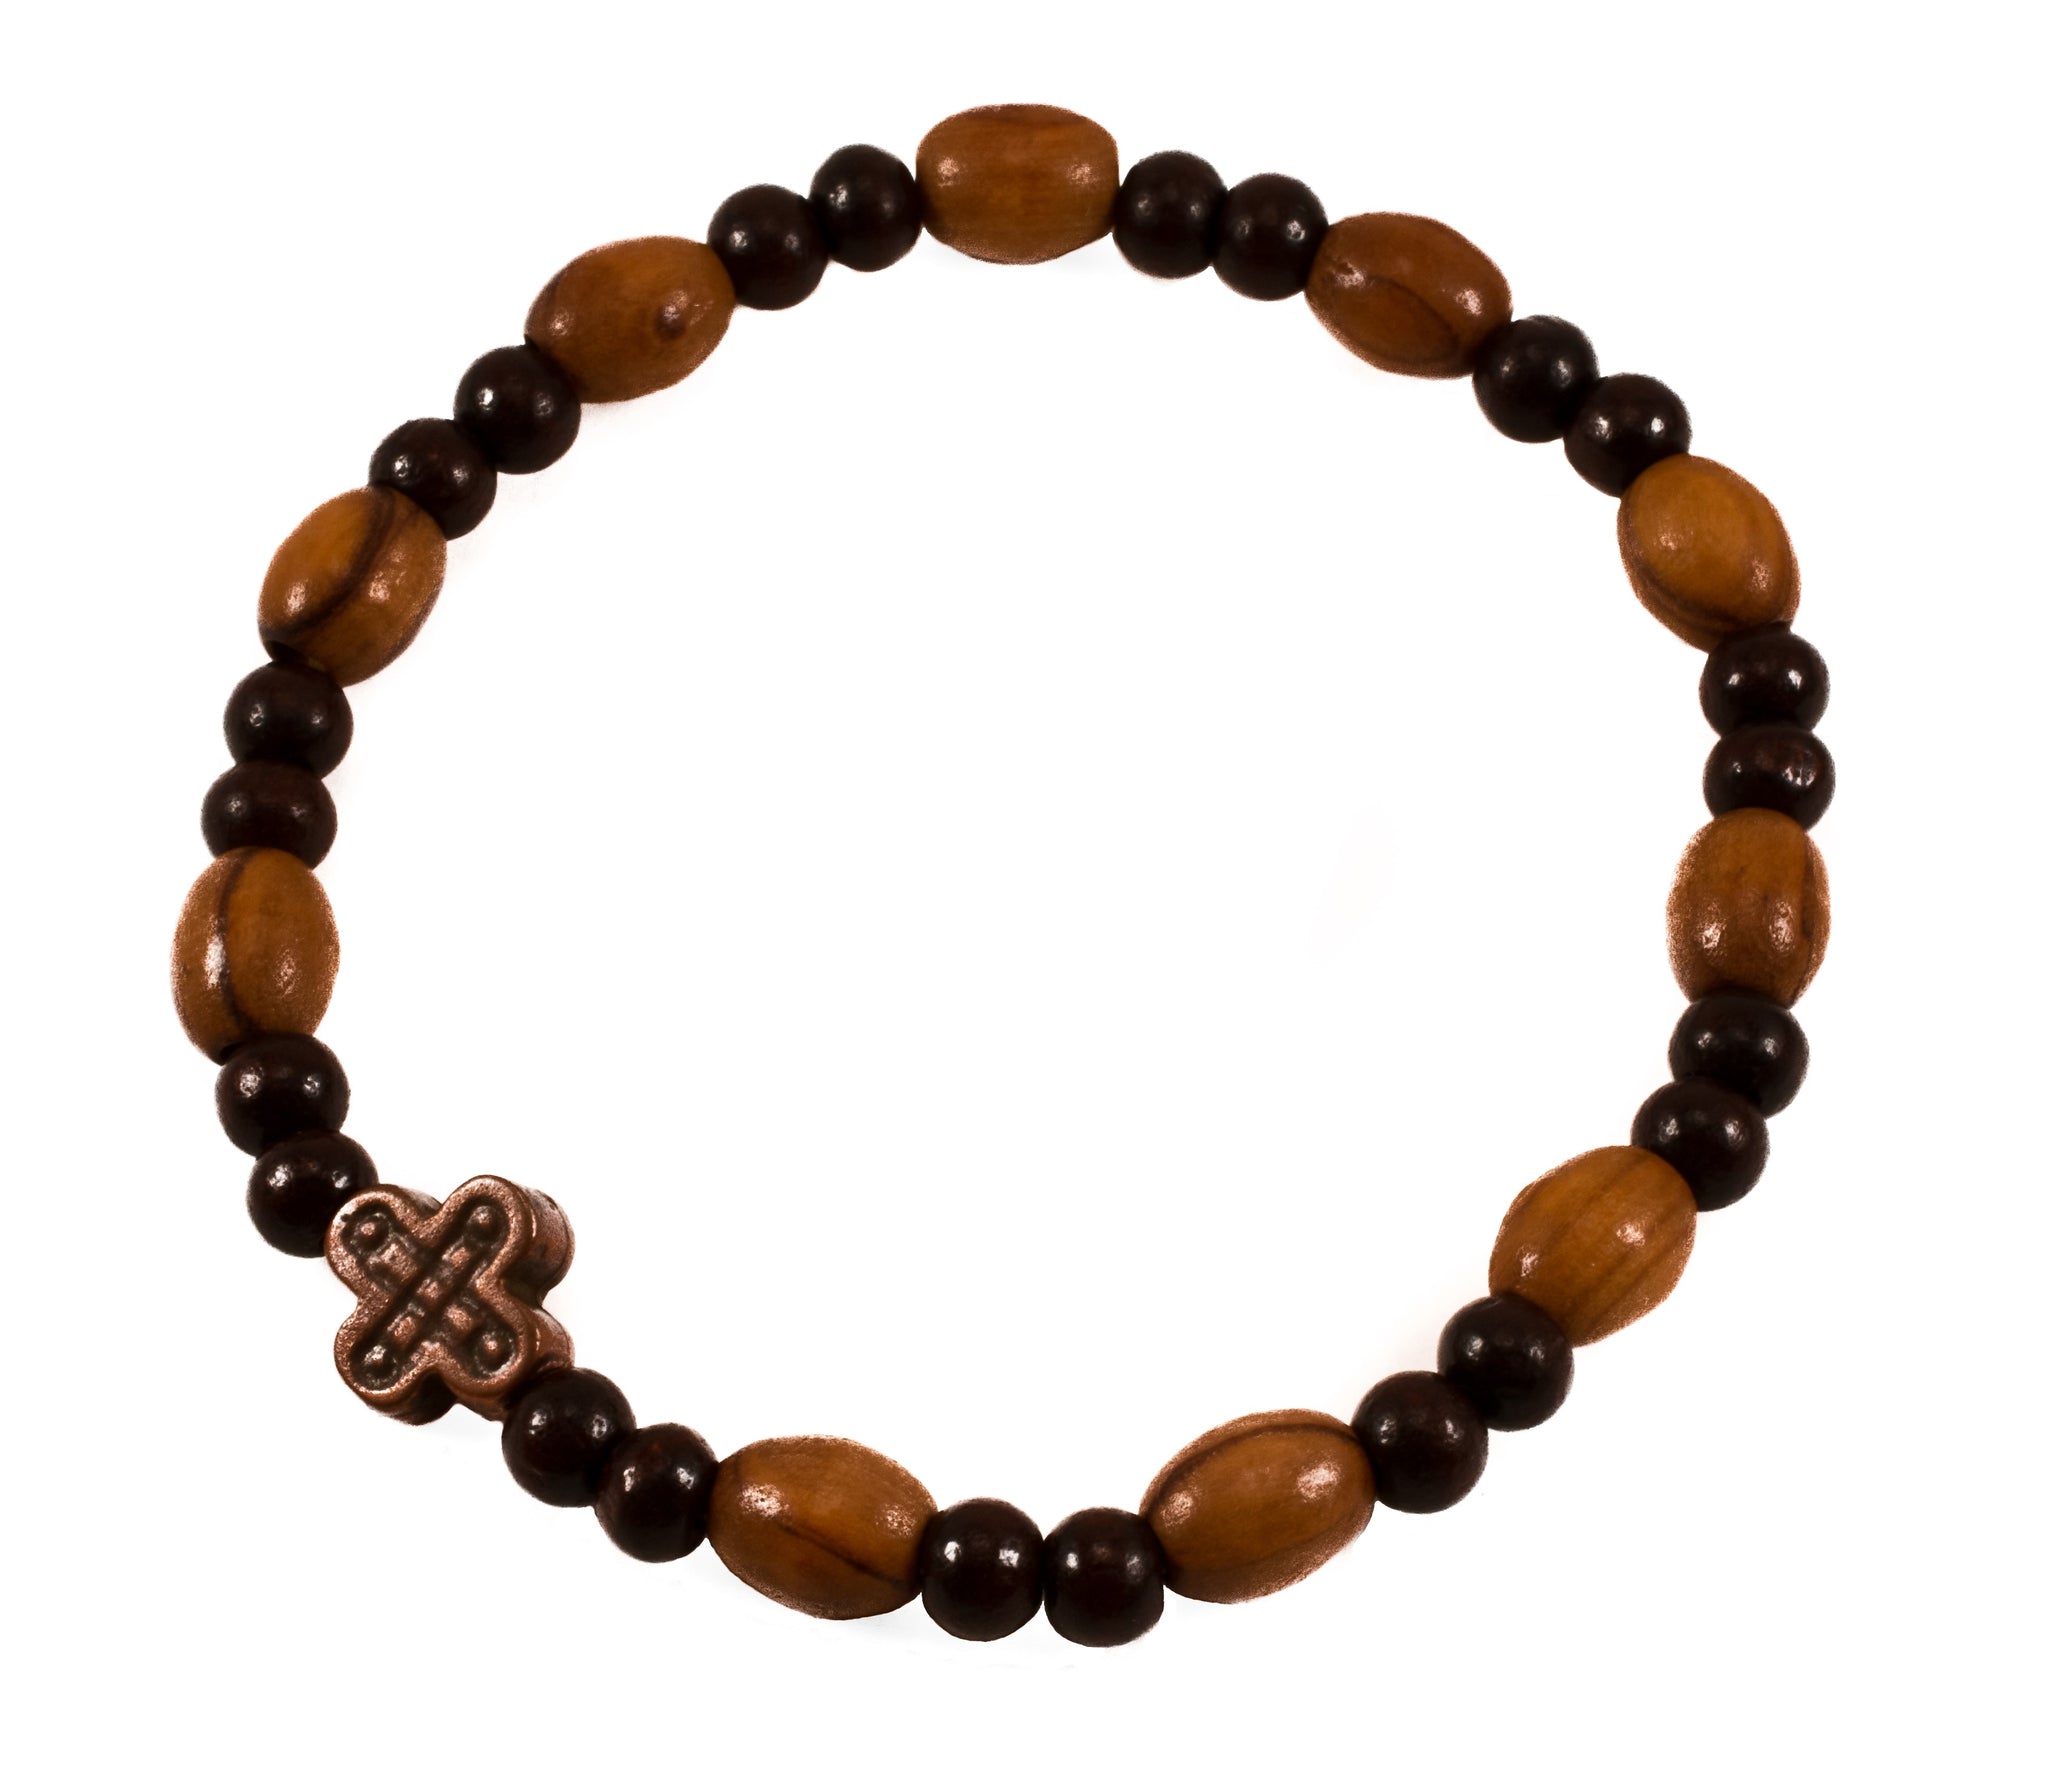 Buy Olive Wood Adjustable 8mm Rosary Bracelet Online at Low Prices in India  | Amazon Jewellery Store - Amazon.in